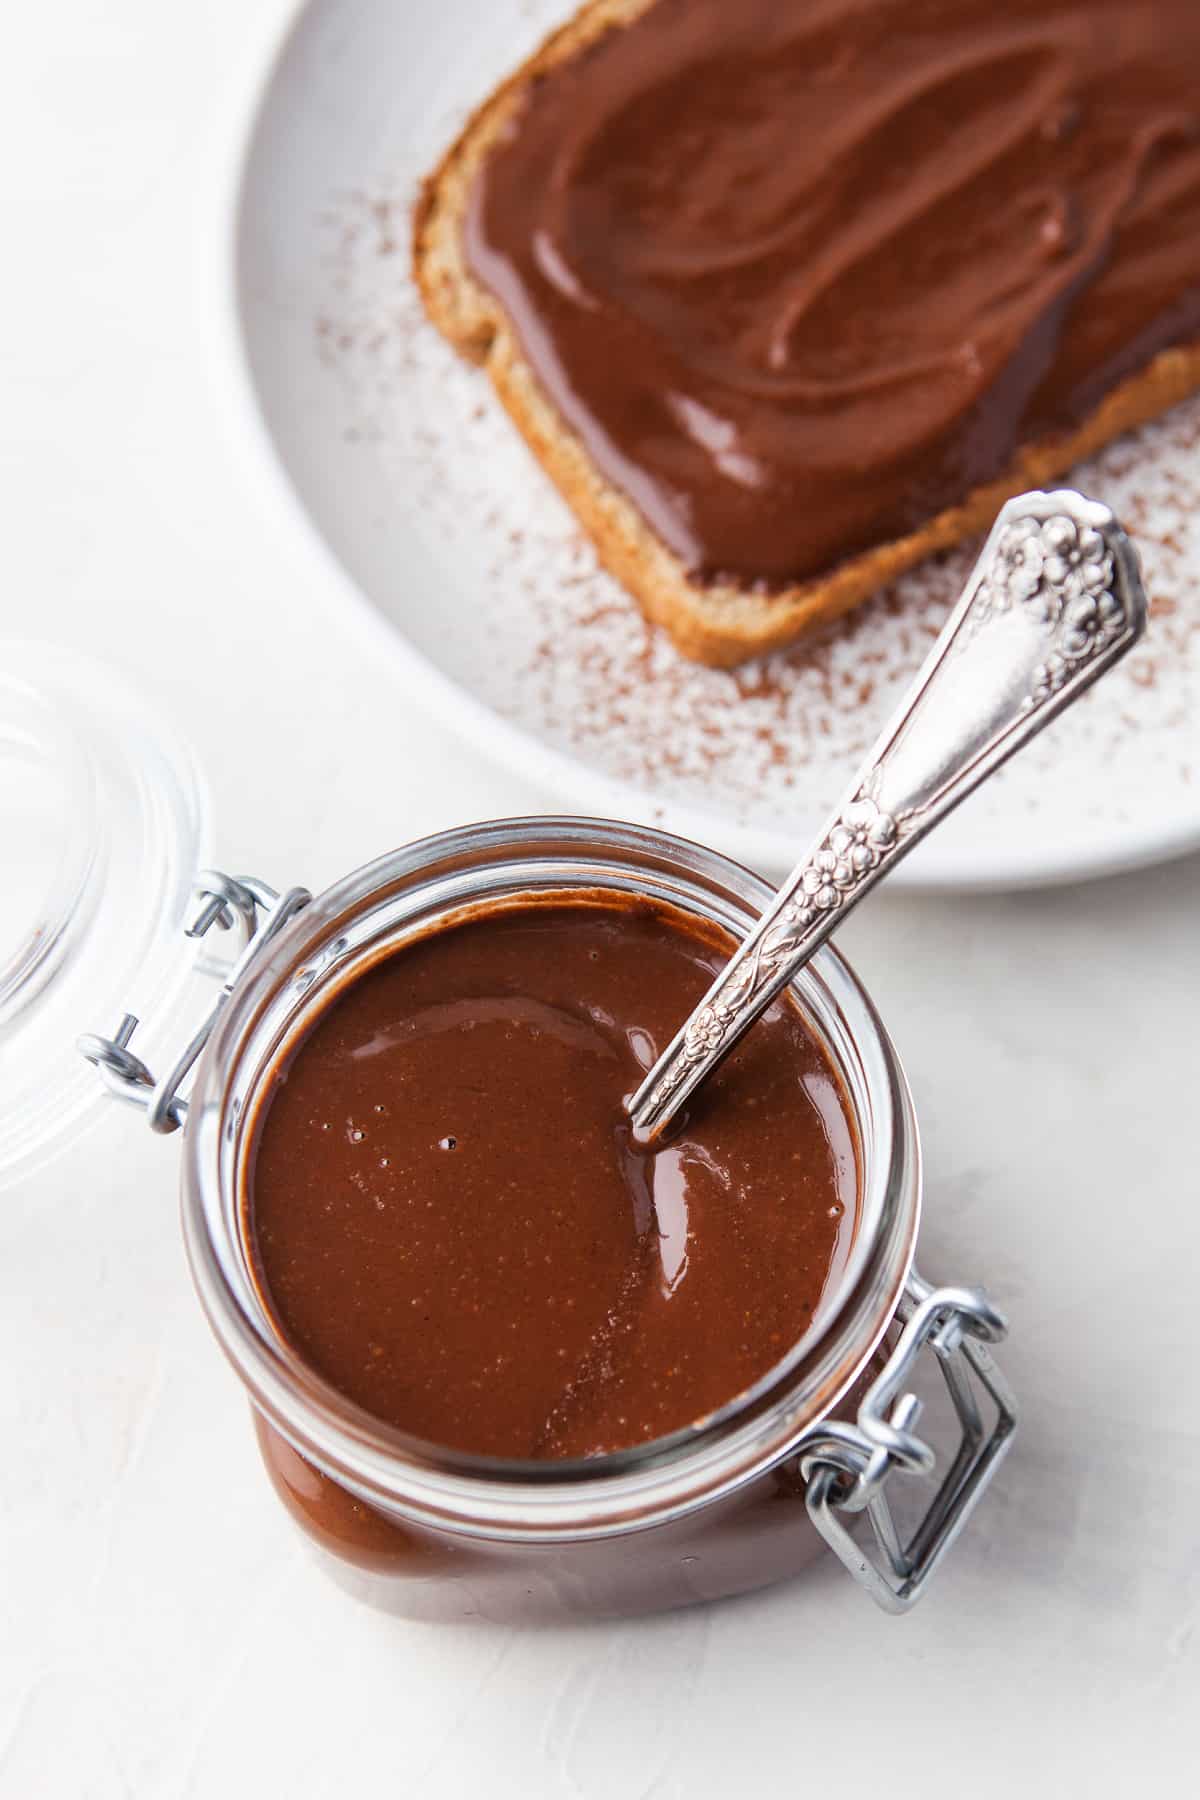 A jar of Nutella beside toast on a plate